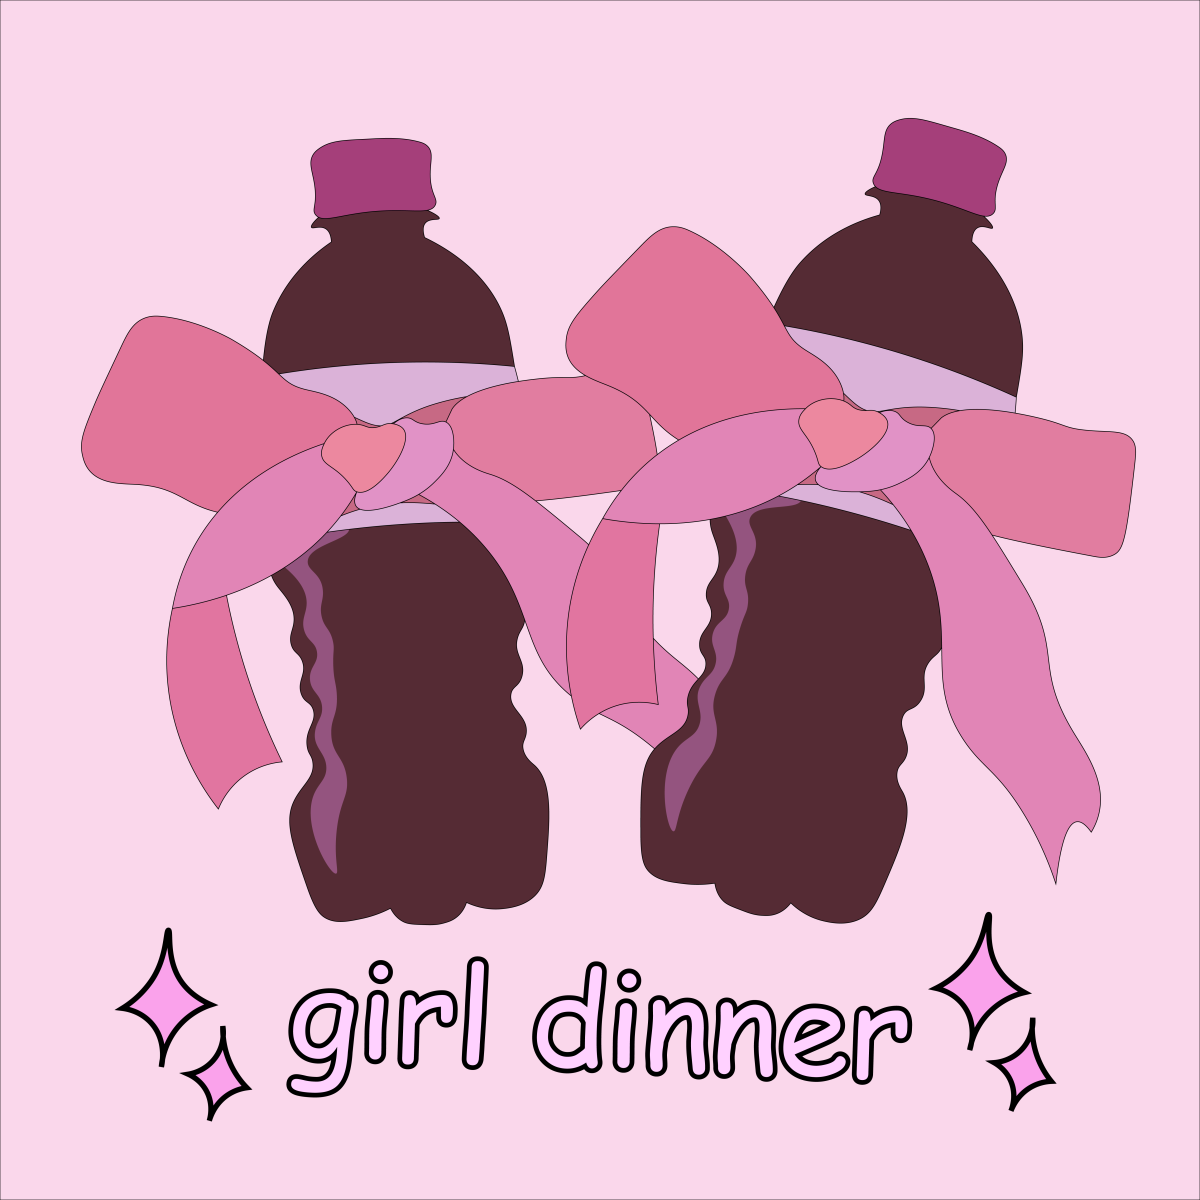 Two soda bottles wrapped with pink bows with a caption reading girl dinner.